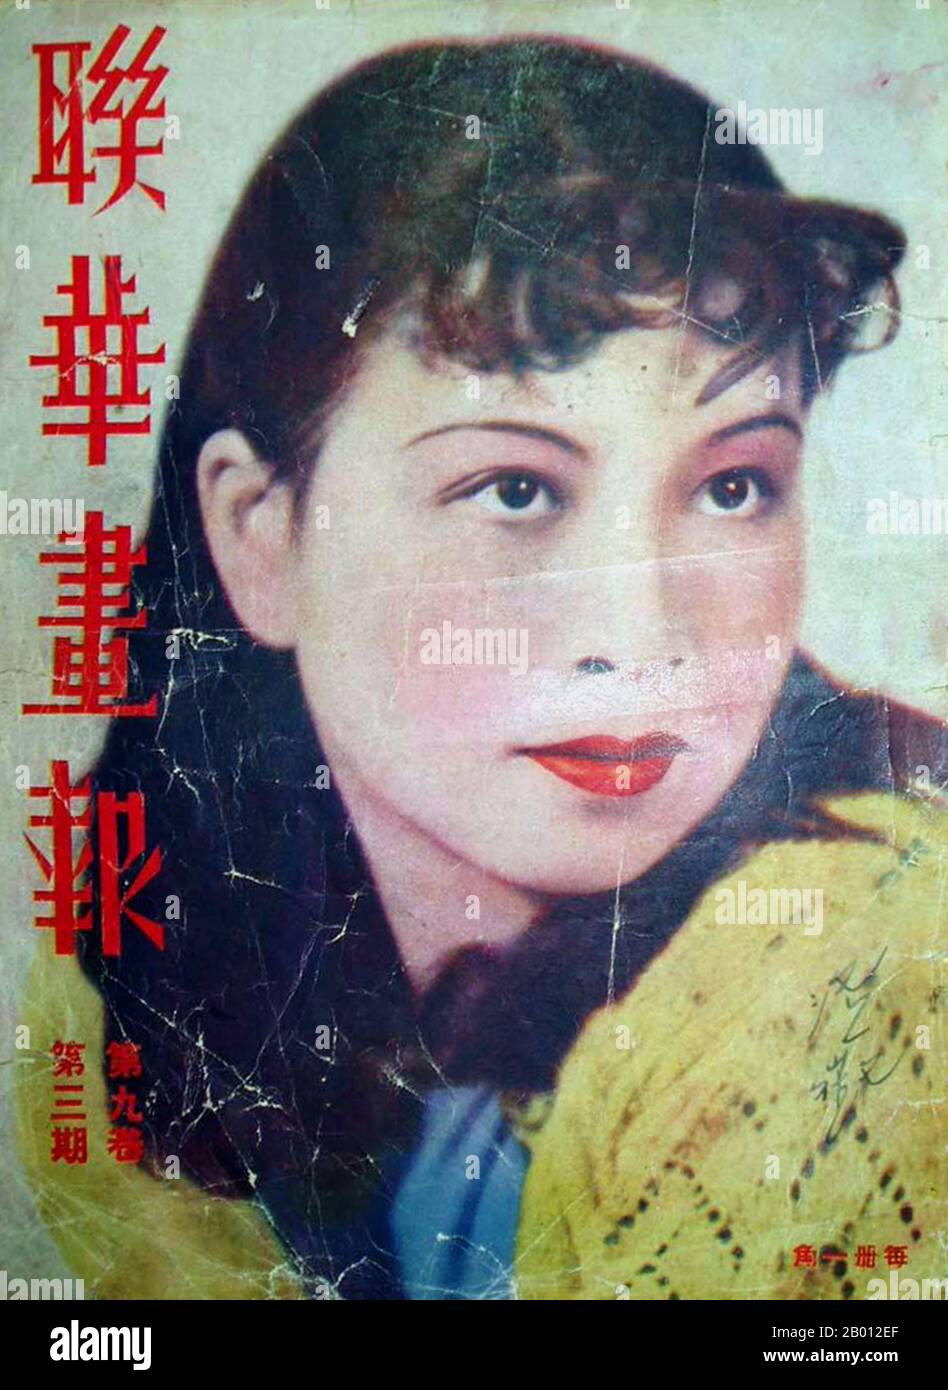 China: Jiang Qing (1914-1991), the future Madame Mao, in a 1930s Shanghai film poster when she acted under the stage name Lan Ping.  Jiang Qing (Chiang Ch'ing, March 1914  – May 14, 1991) was the pseudonym that was used by Chinese leader Mao Zedong's last wife and major Communist Party of China power figure.  She went by the stage name Lan Ping during her acting career, and was known by various other names during her life. She married Mao in Yan'an in November 1938, and is sometimes referred to as Madame Mao in Western literature, serving as Communist China's first first lady. Stock Photo